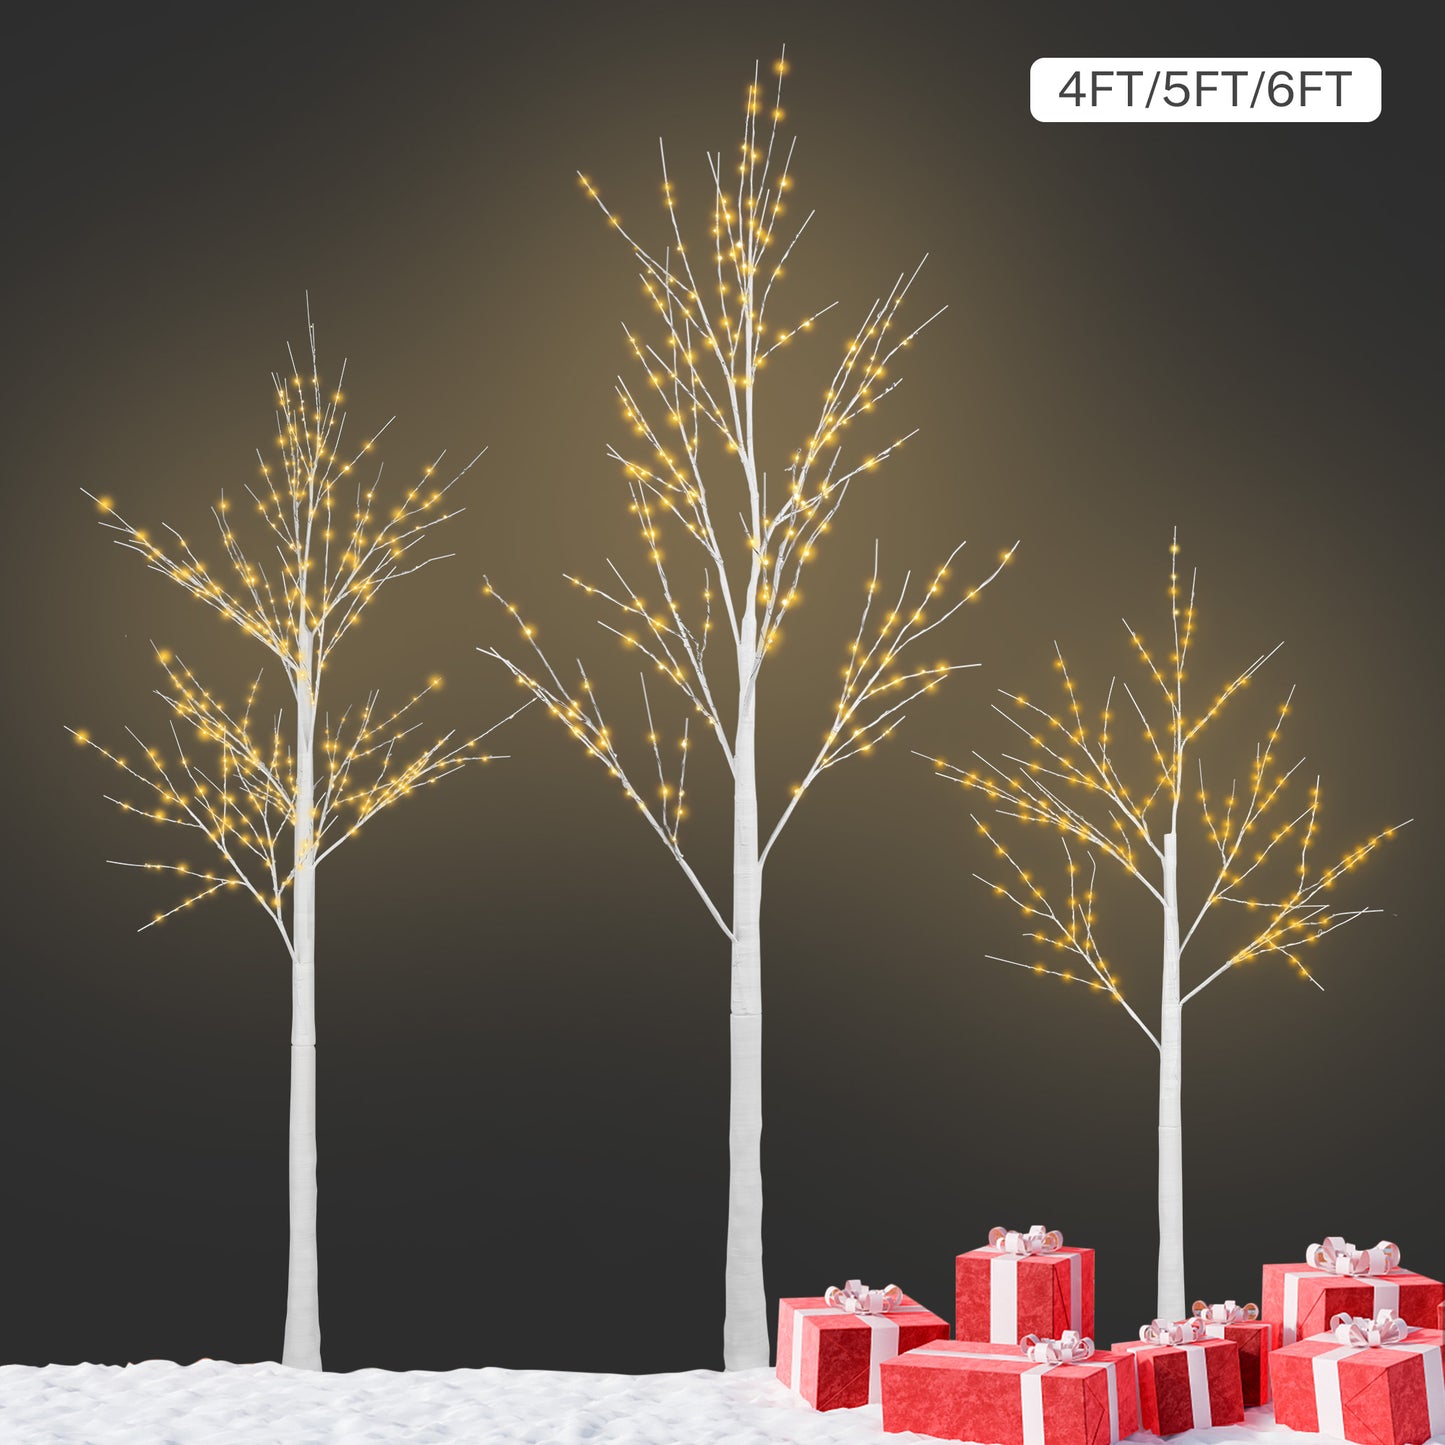 4ft/5ft/6ft White Birch Trees Set of 3, Christmas Trees with LED Lights, Lighted Birch Trees for Home Indoor Outdoor Festival Party Decoration, Christmas Decoration Trees, Warm White, Y034